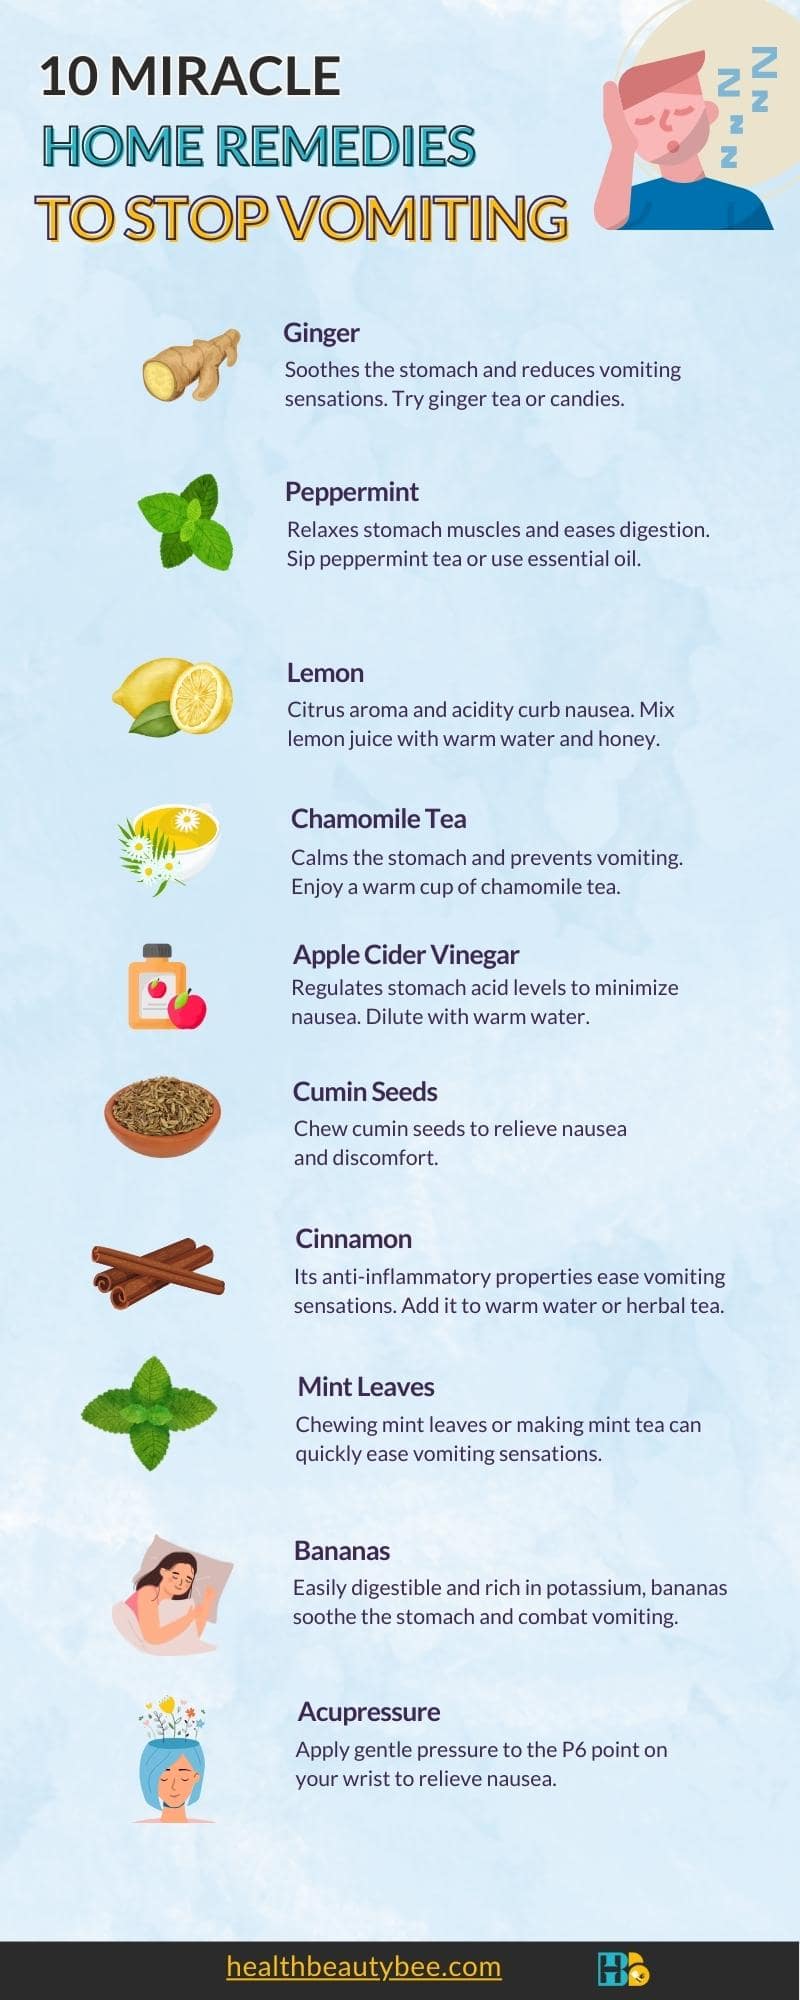 Home Remedies to Stop Vomiting healthbeautybee infographic